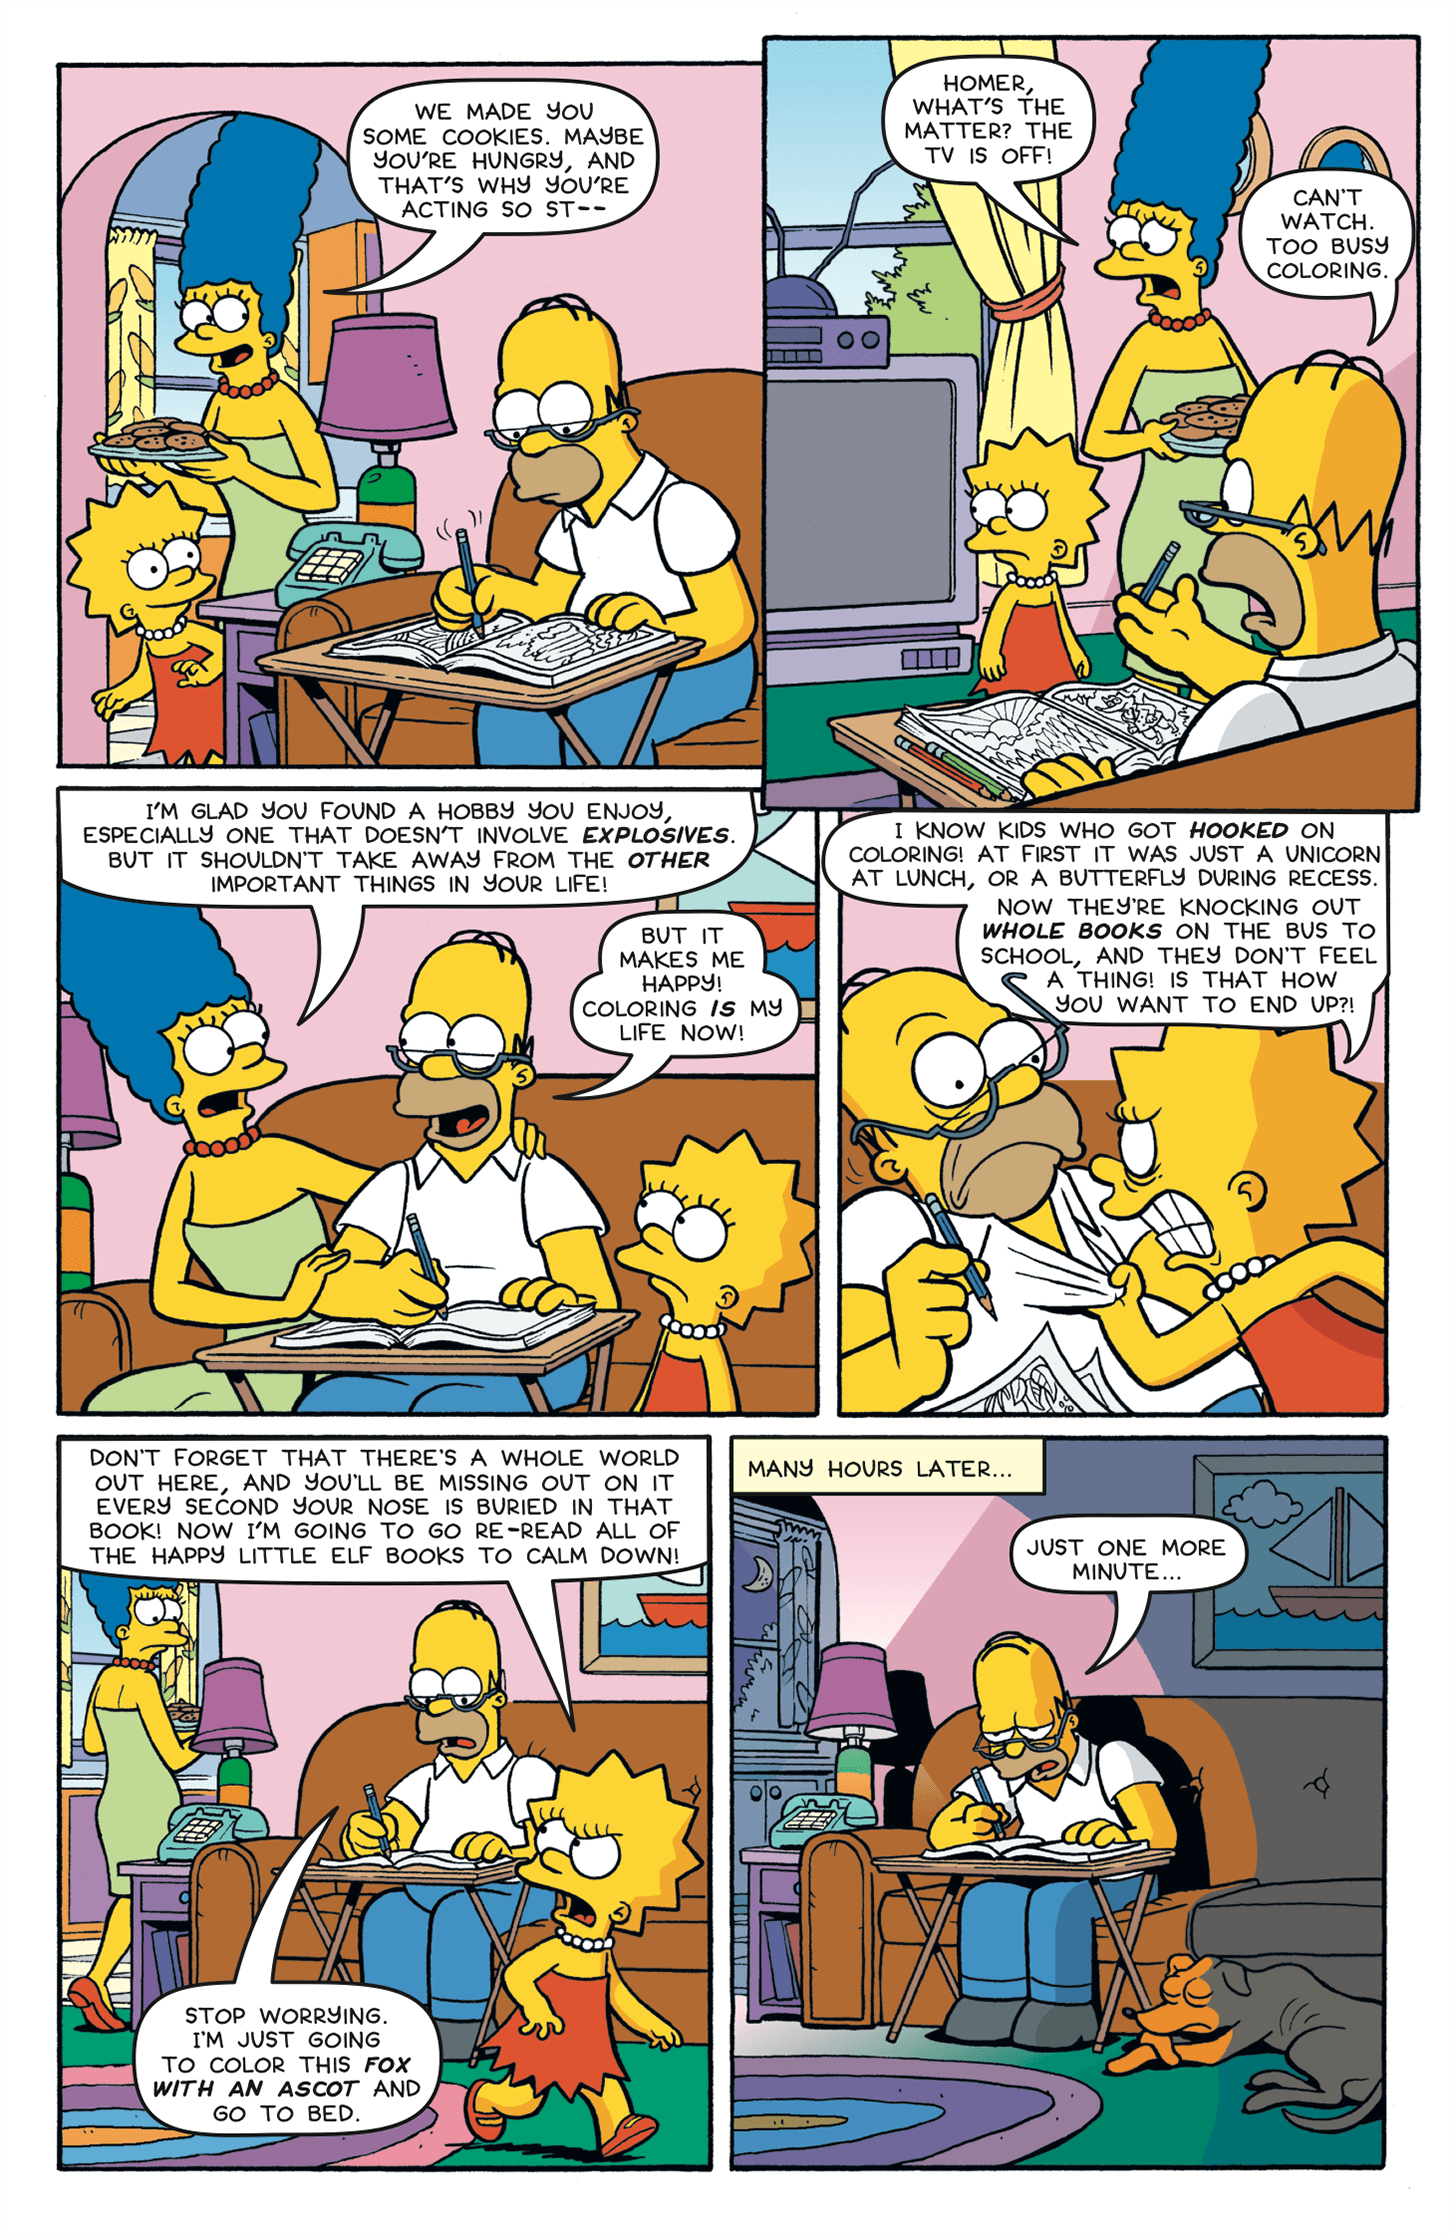 Simpsons Comics (1993-): Chapter 240 - Page 4